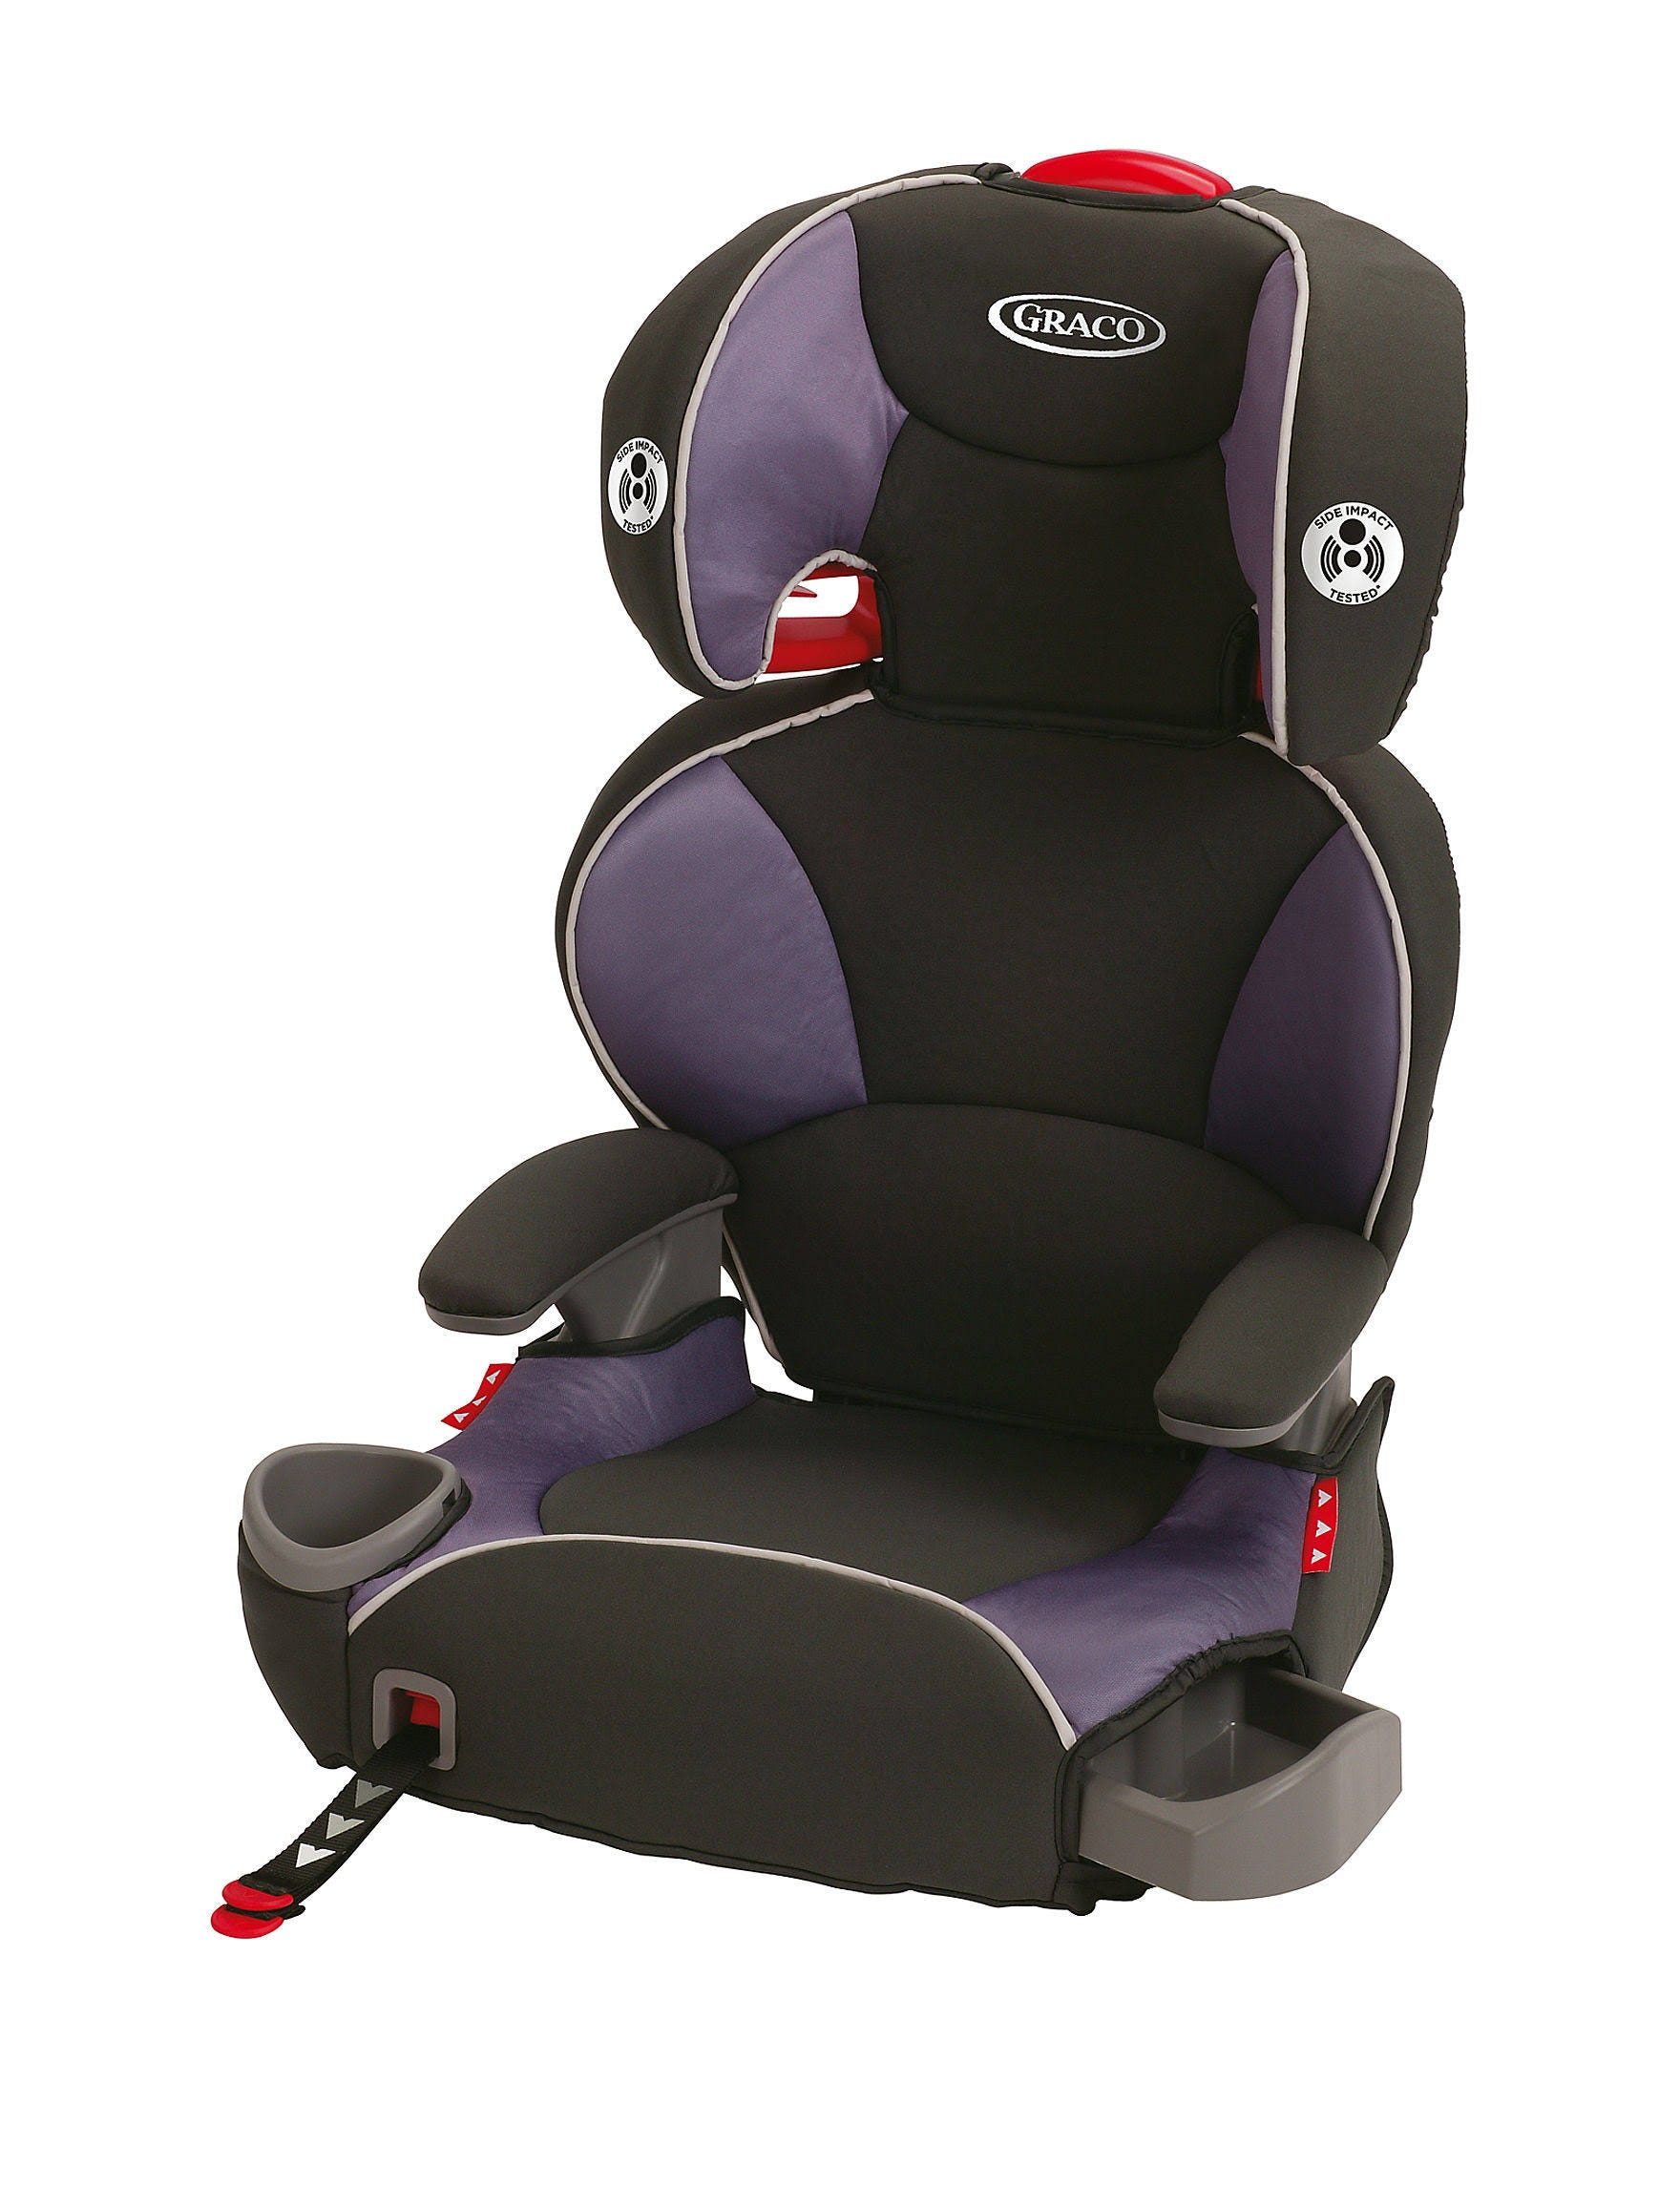 Graco Atomic High Back Booster Car Seat for Children 3-10 Years Old | Image